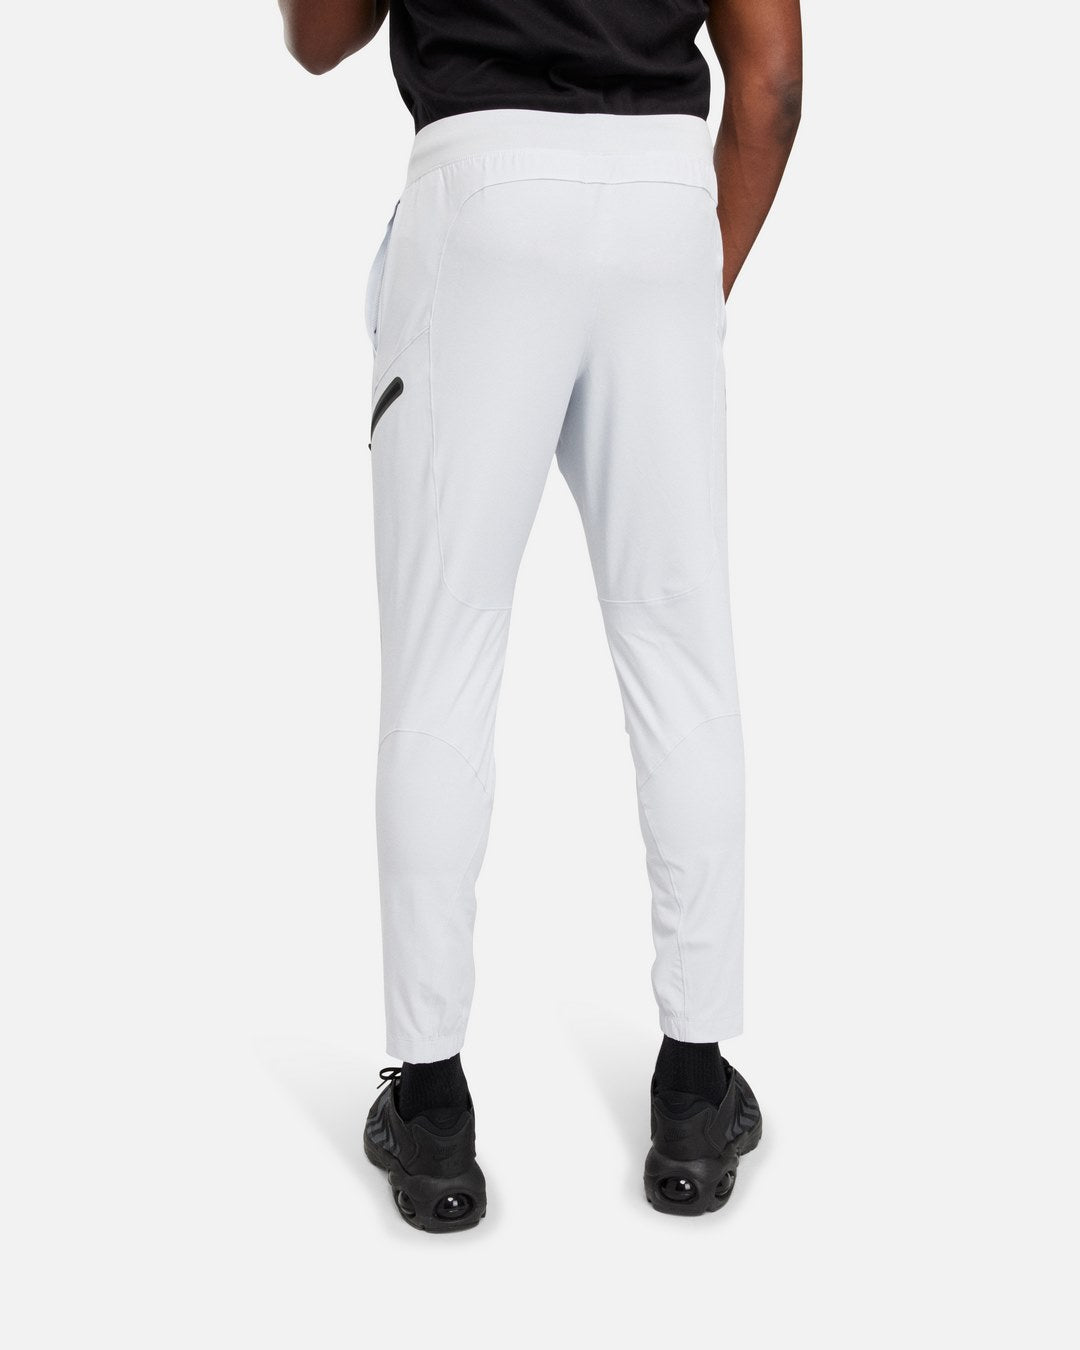 Under Armor Unstoppable Cargo Pants - Grey/Black